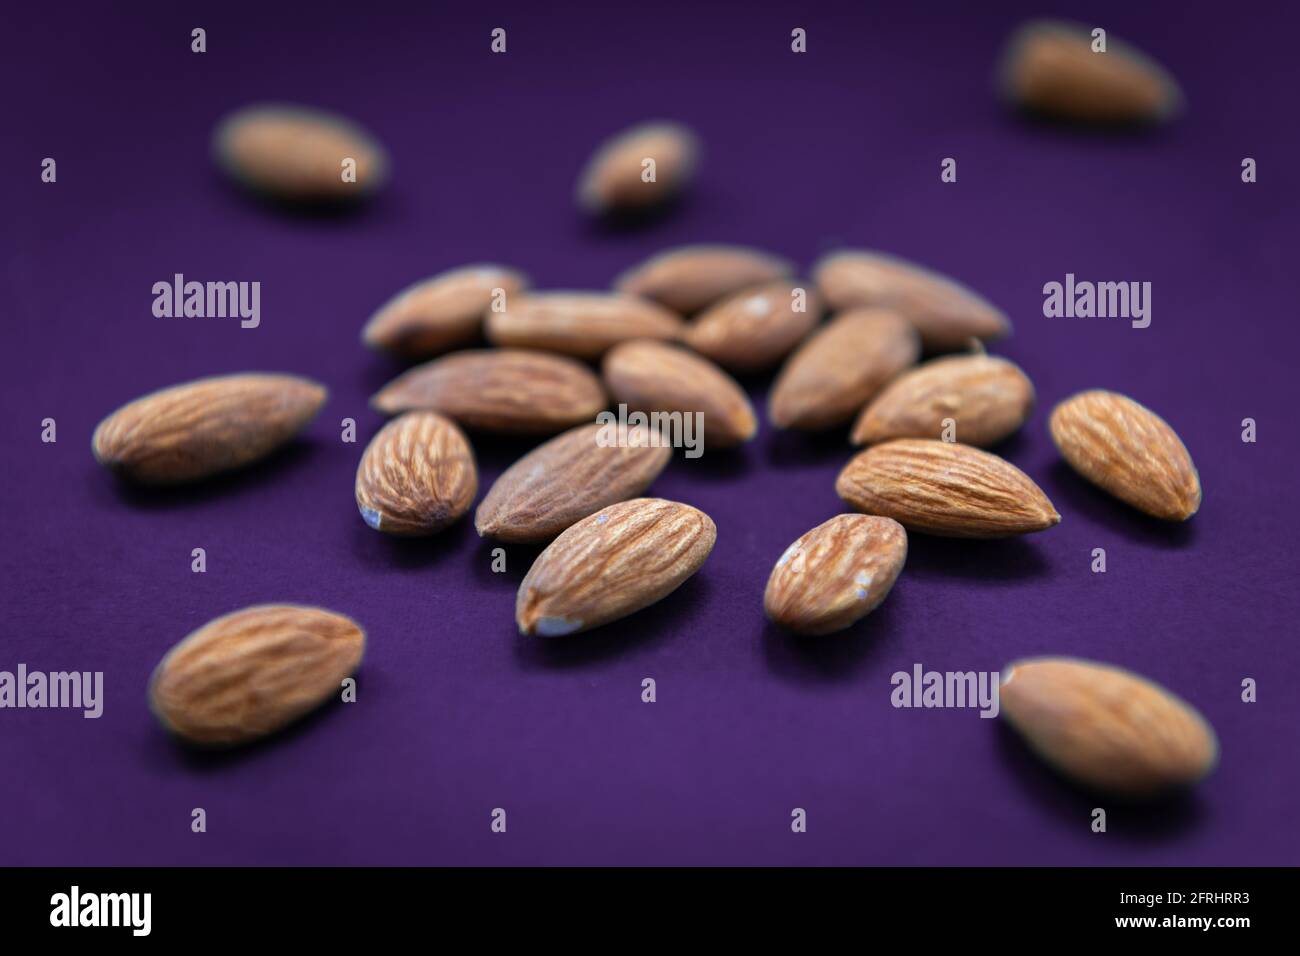 A closeup of delicious crunchy almonds with a purple background. Stock Photo